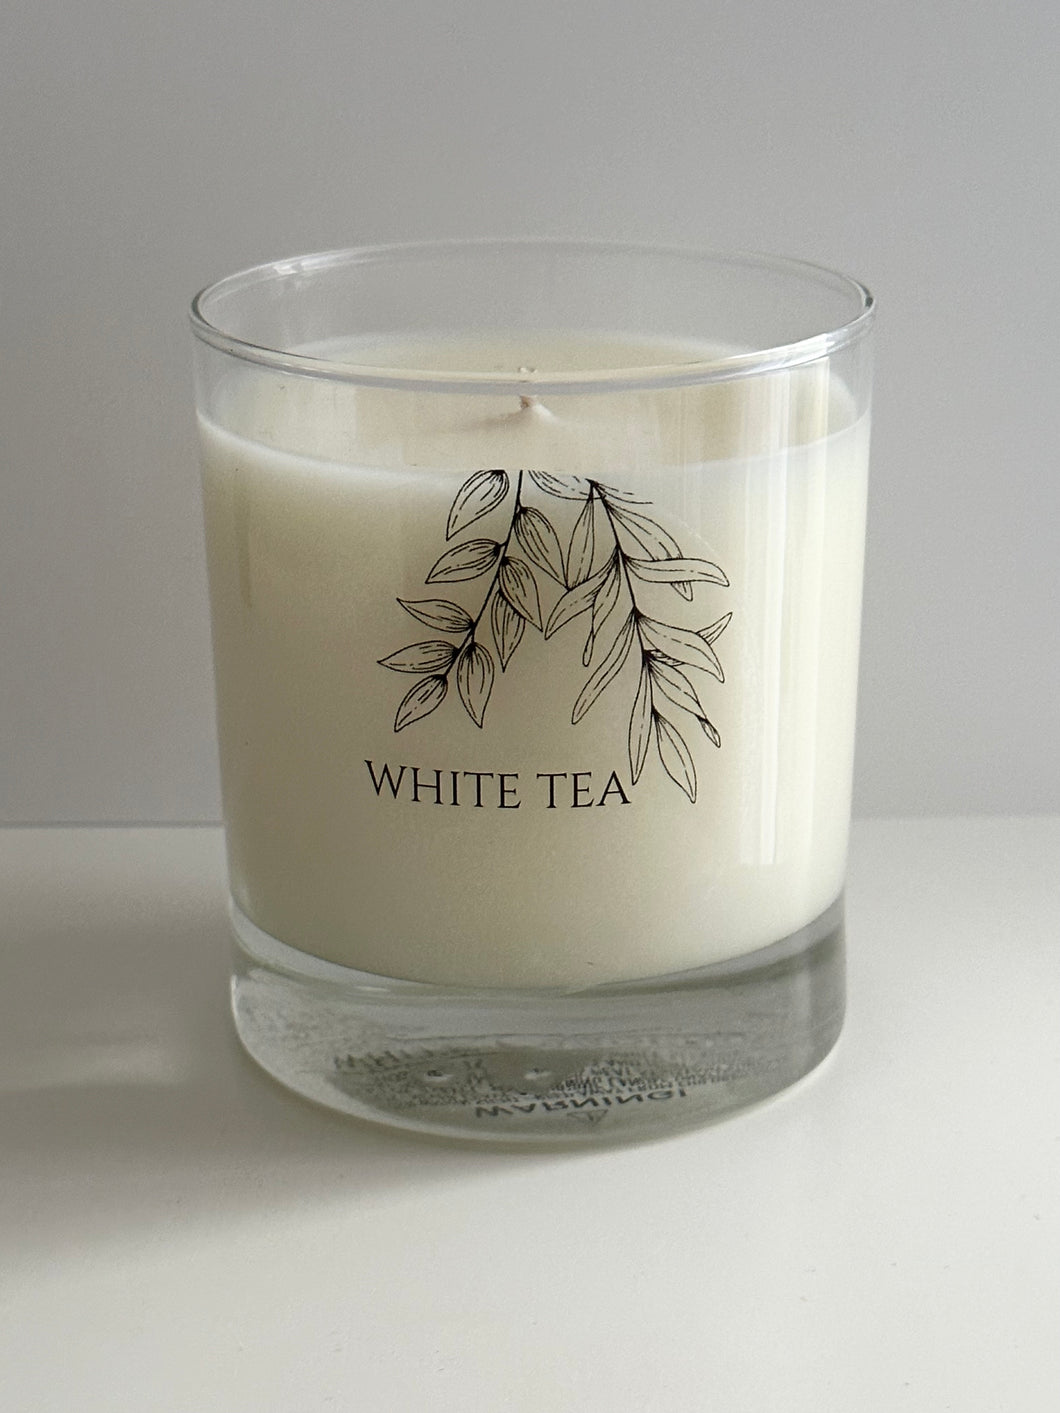 WHITE TEA SOY CANDLE